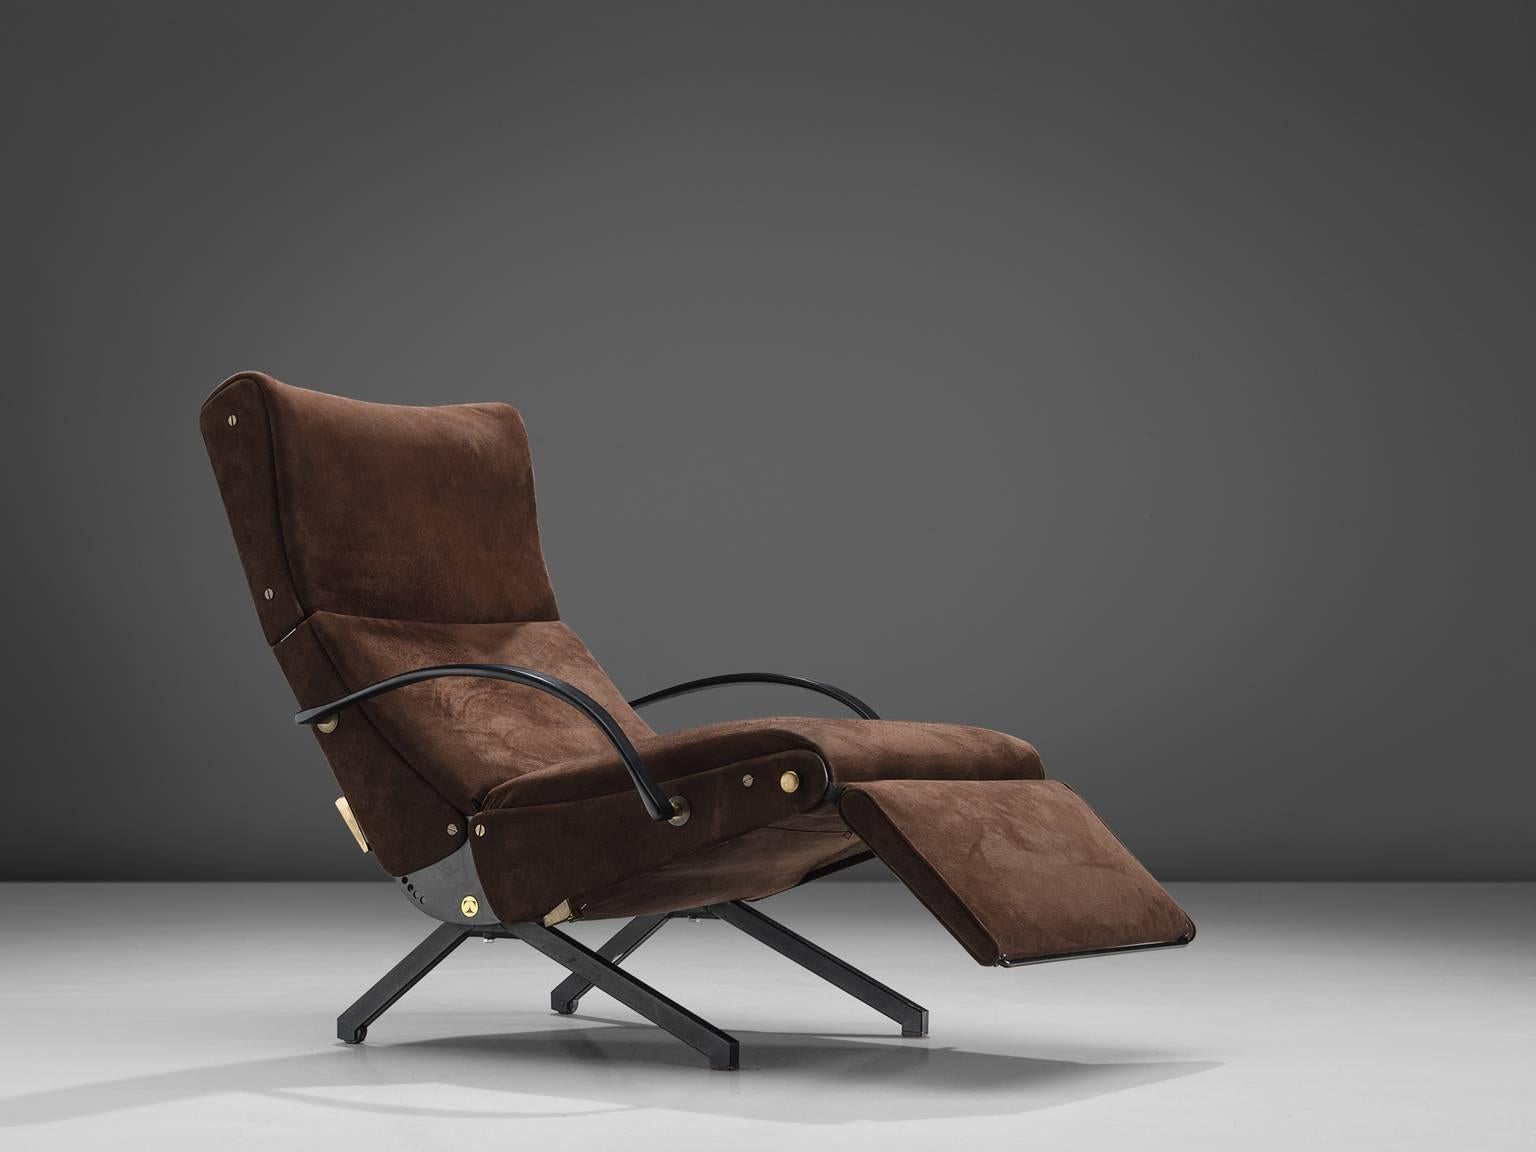 Osvaldo Borsani for Tecno, P40 lounge chair, original brown fabric, metal, Italy, 1955. 

This lounge chair has been the result of the relentless search for an armchair that facilitated maximum relaxation. This search was in line with other